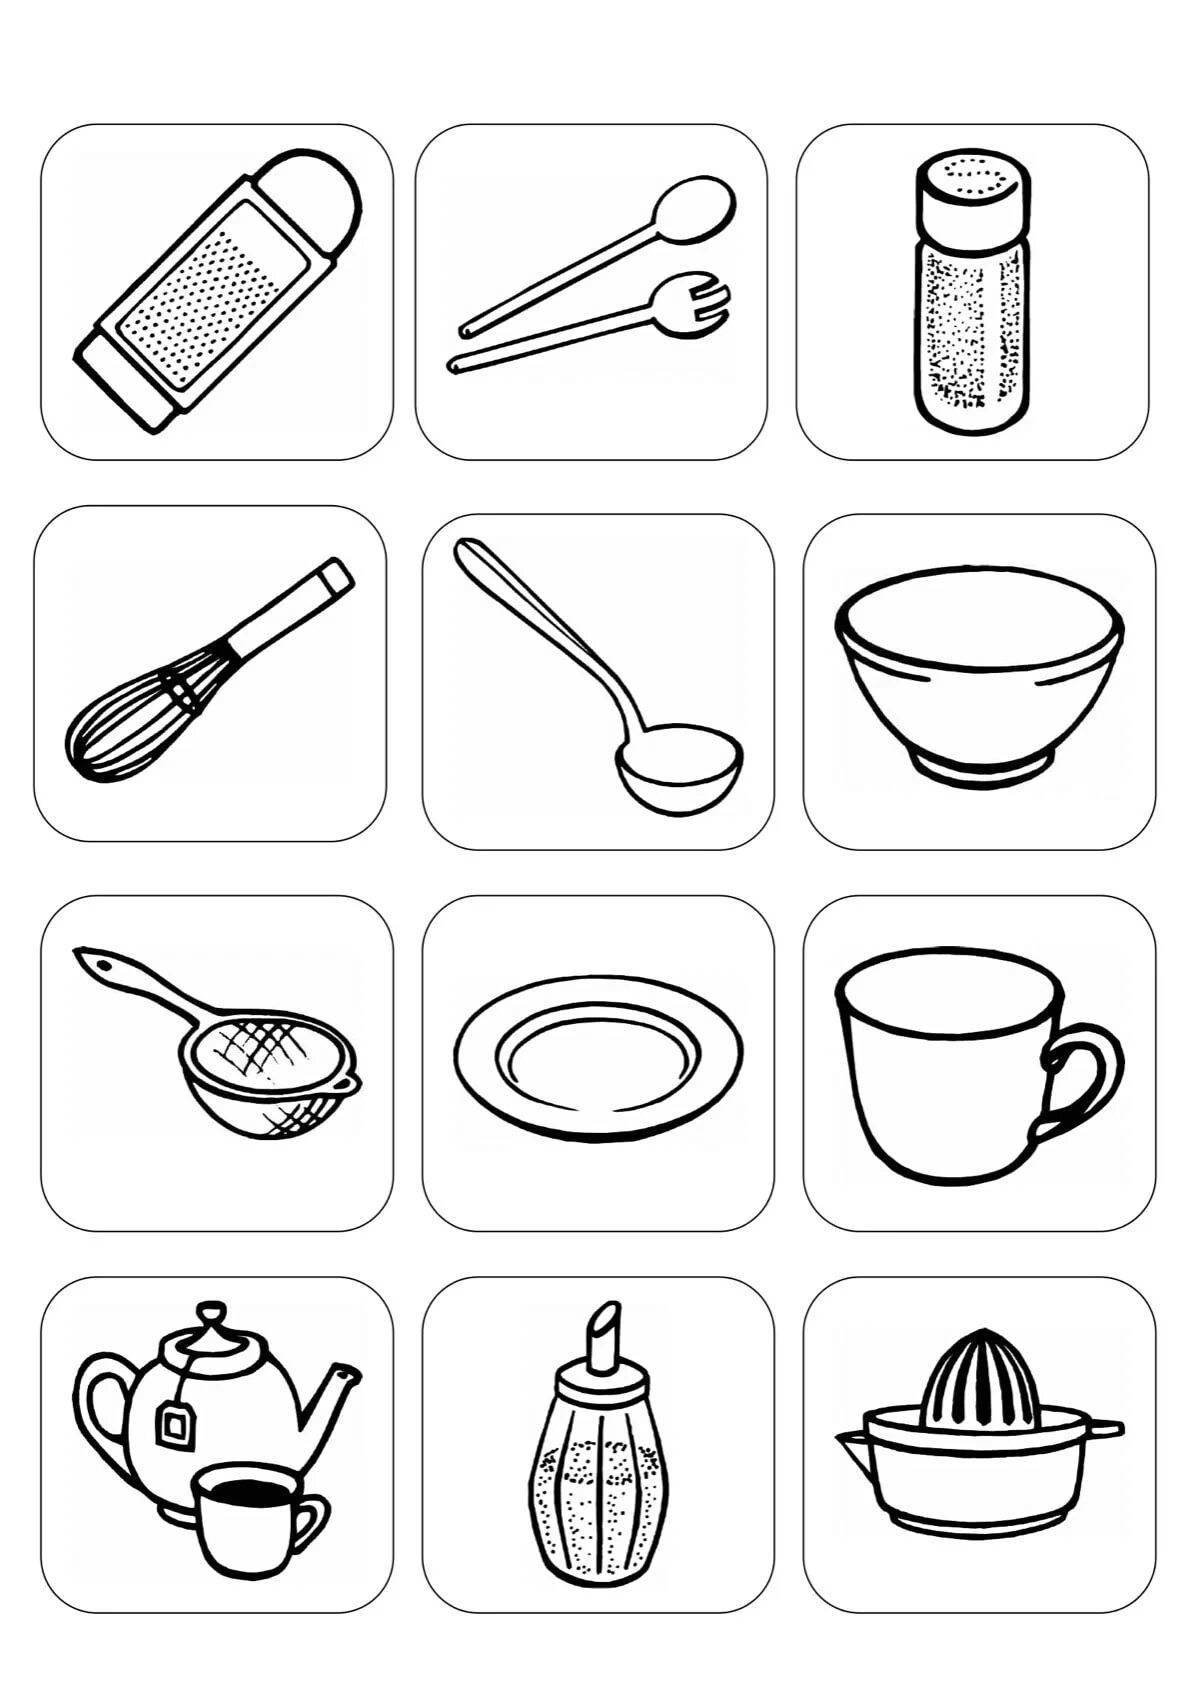 Fashion tableware coloring page